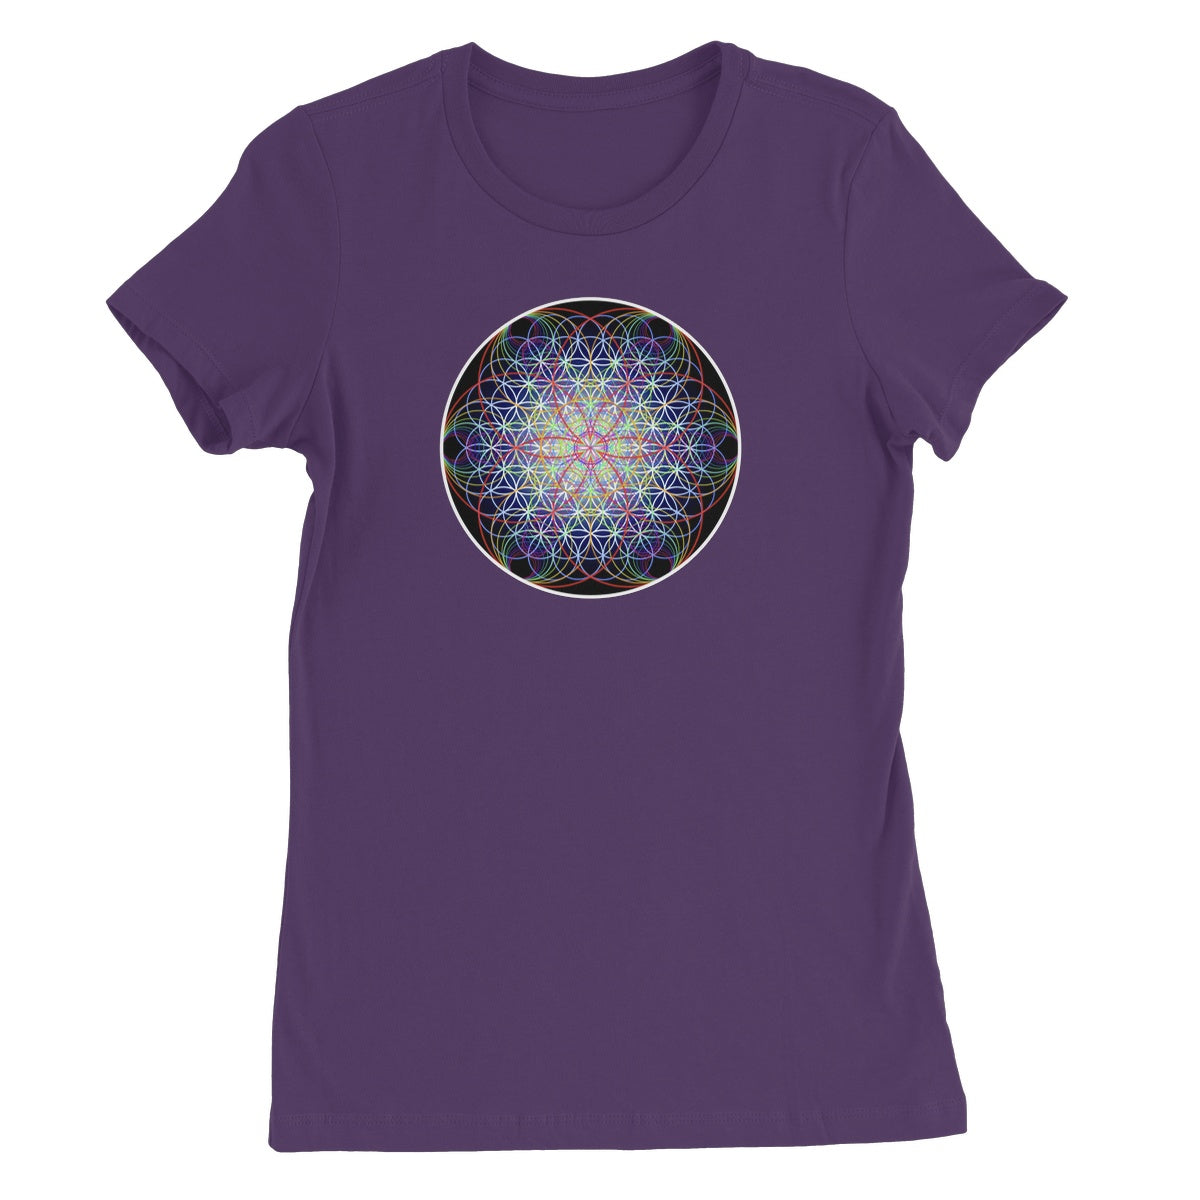 Sound Waves Resonating within the Flower of Life Women's Favourite T-Shirt